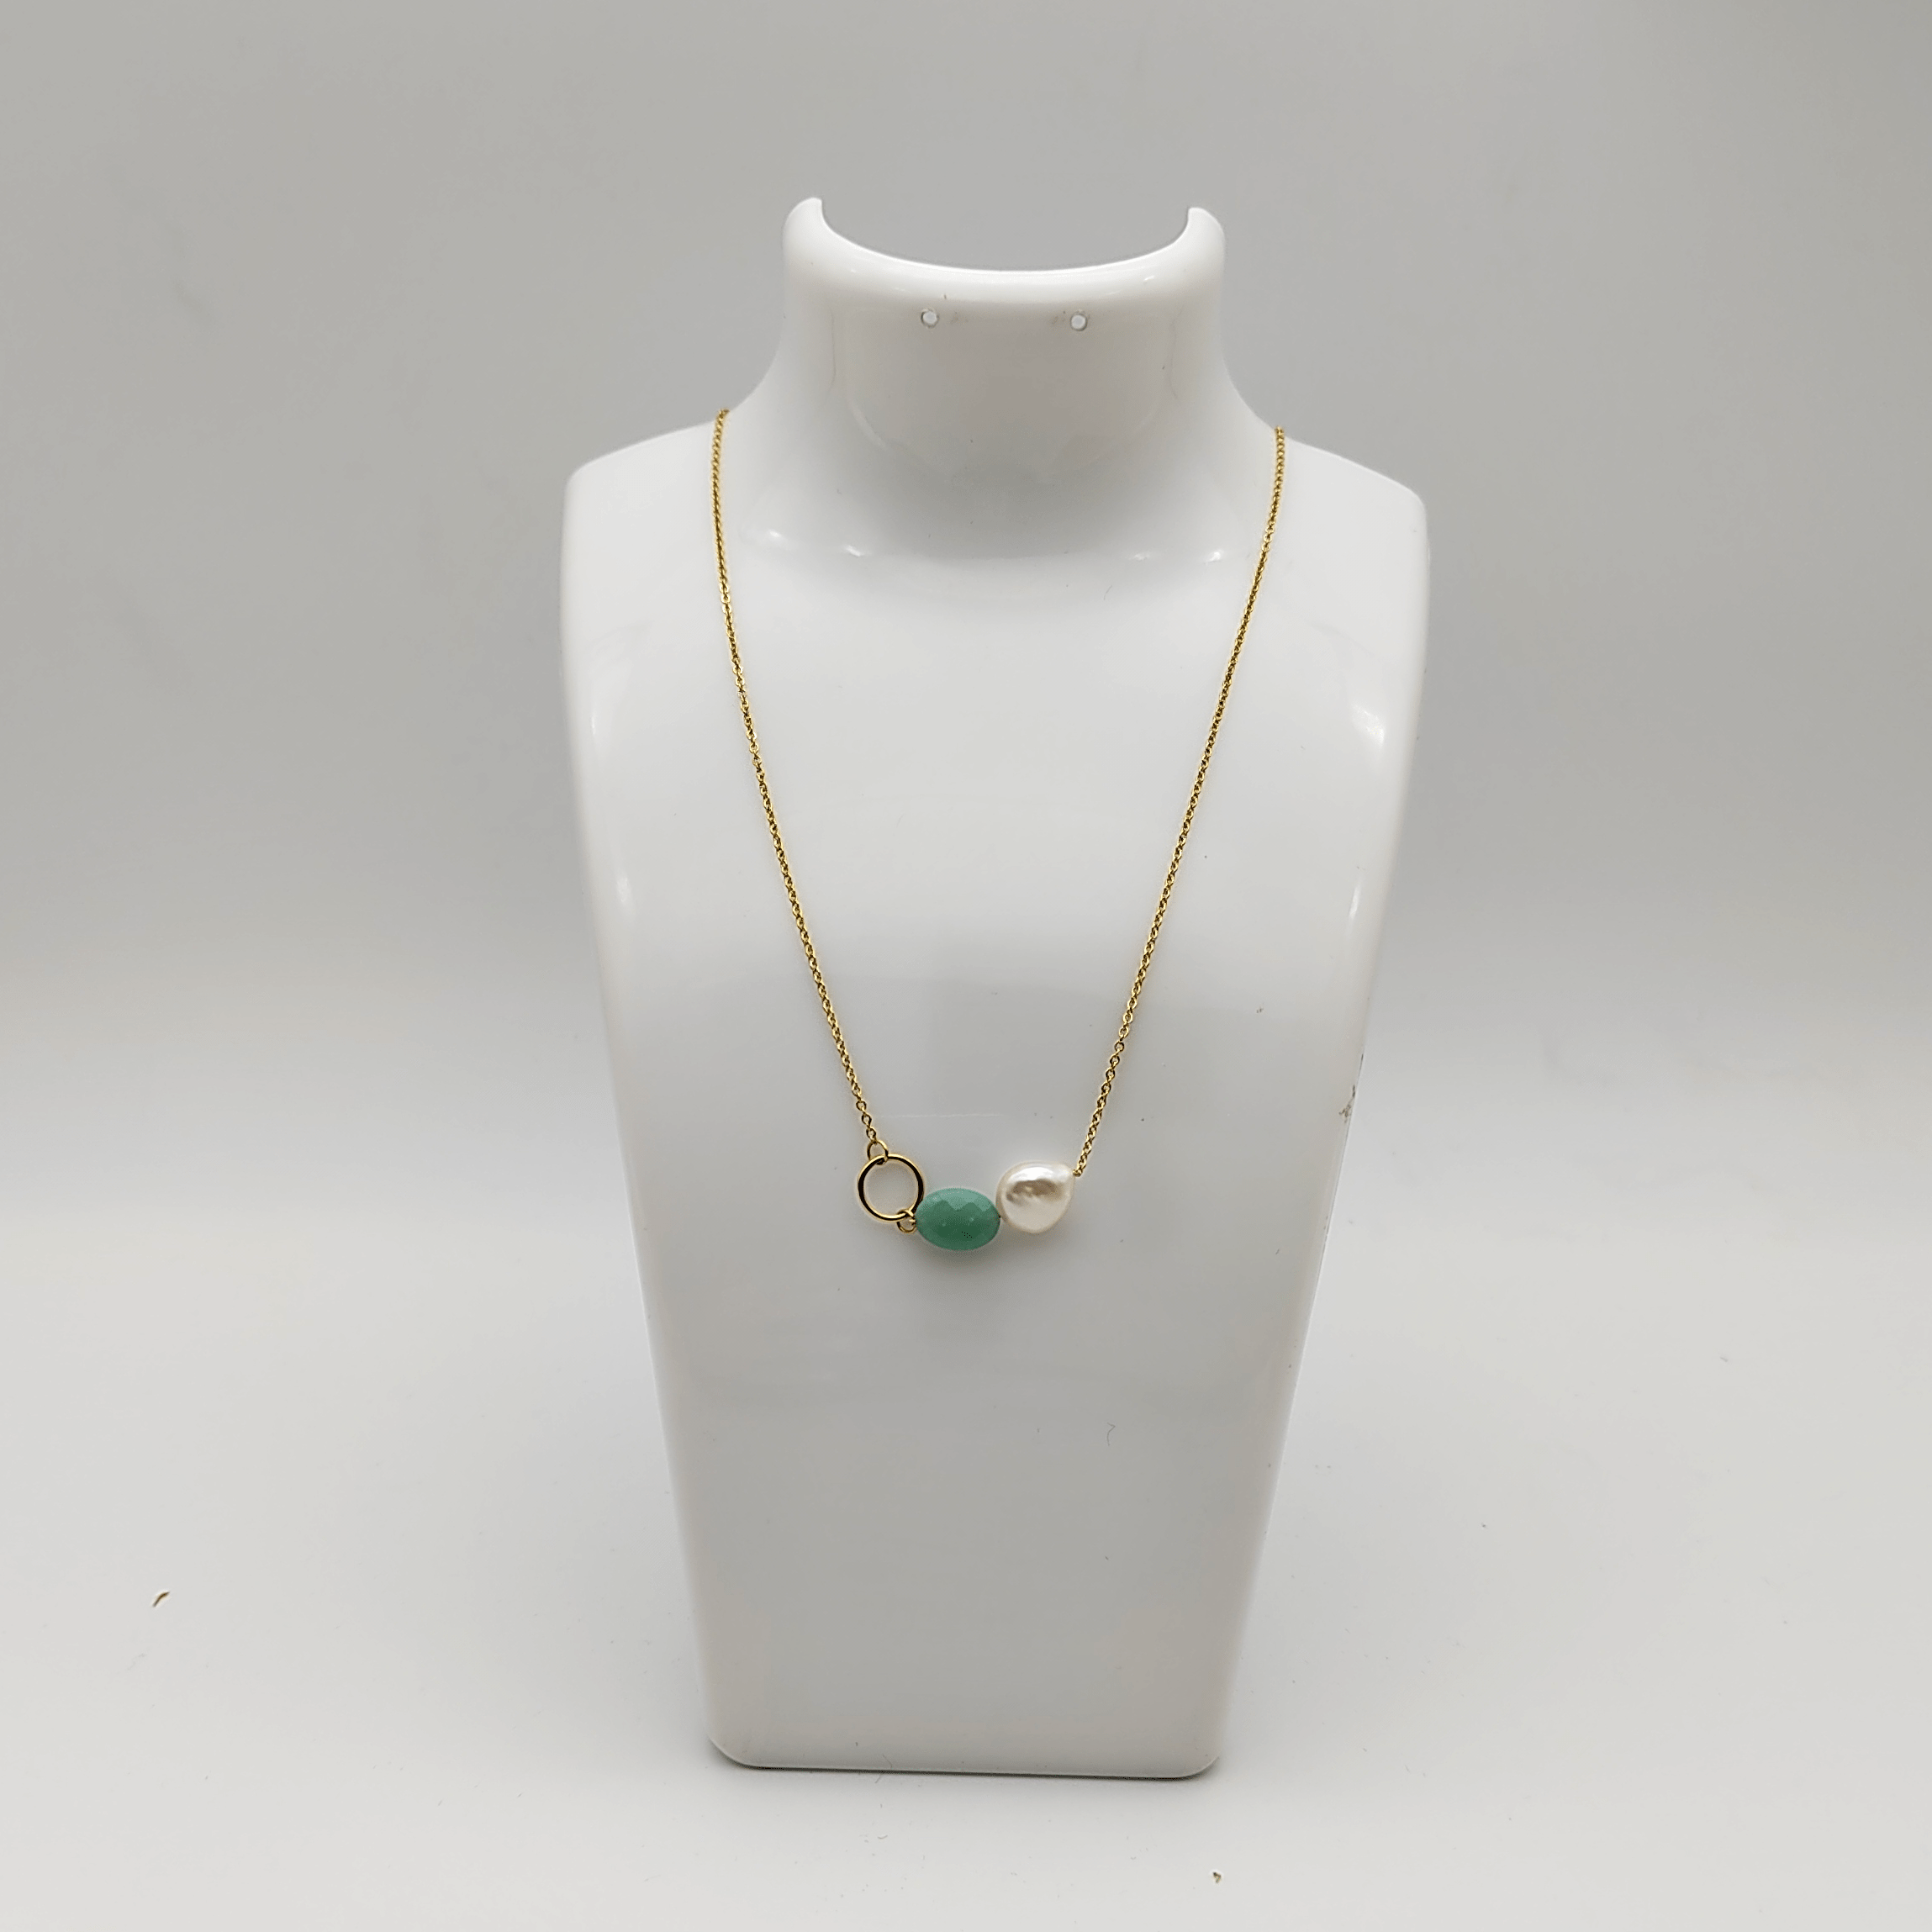 Outlet W&B Female Necklaces Green & White Stones Stainless Steel Necklace